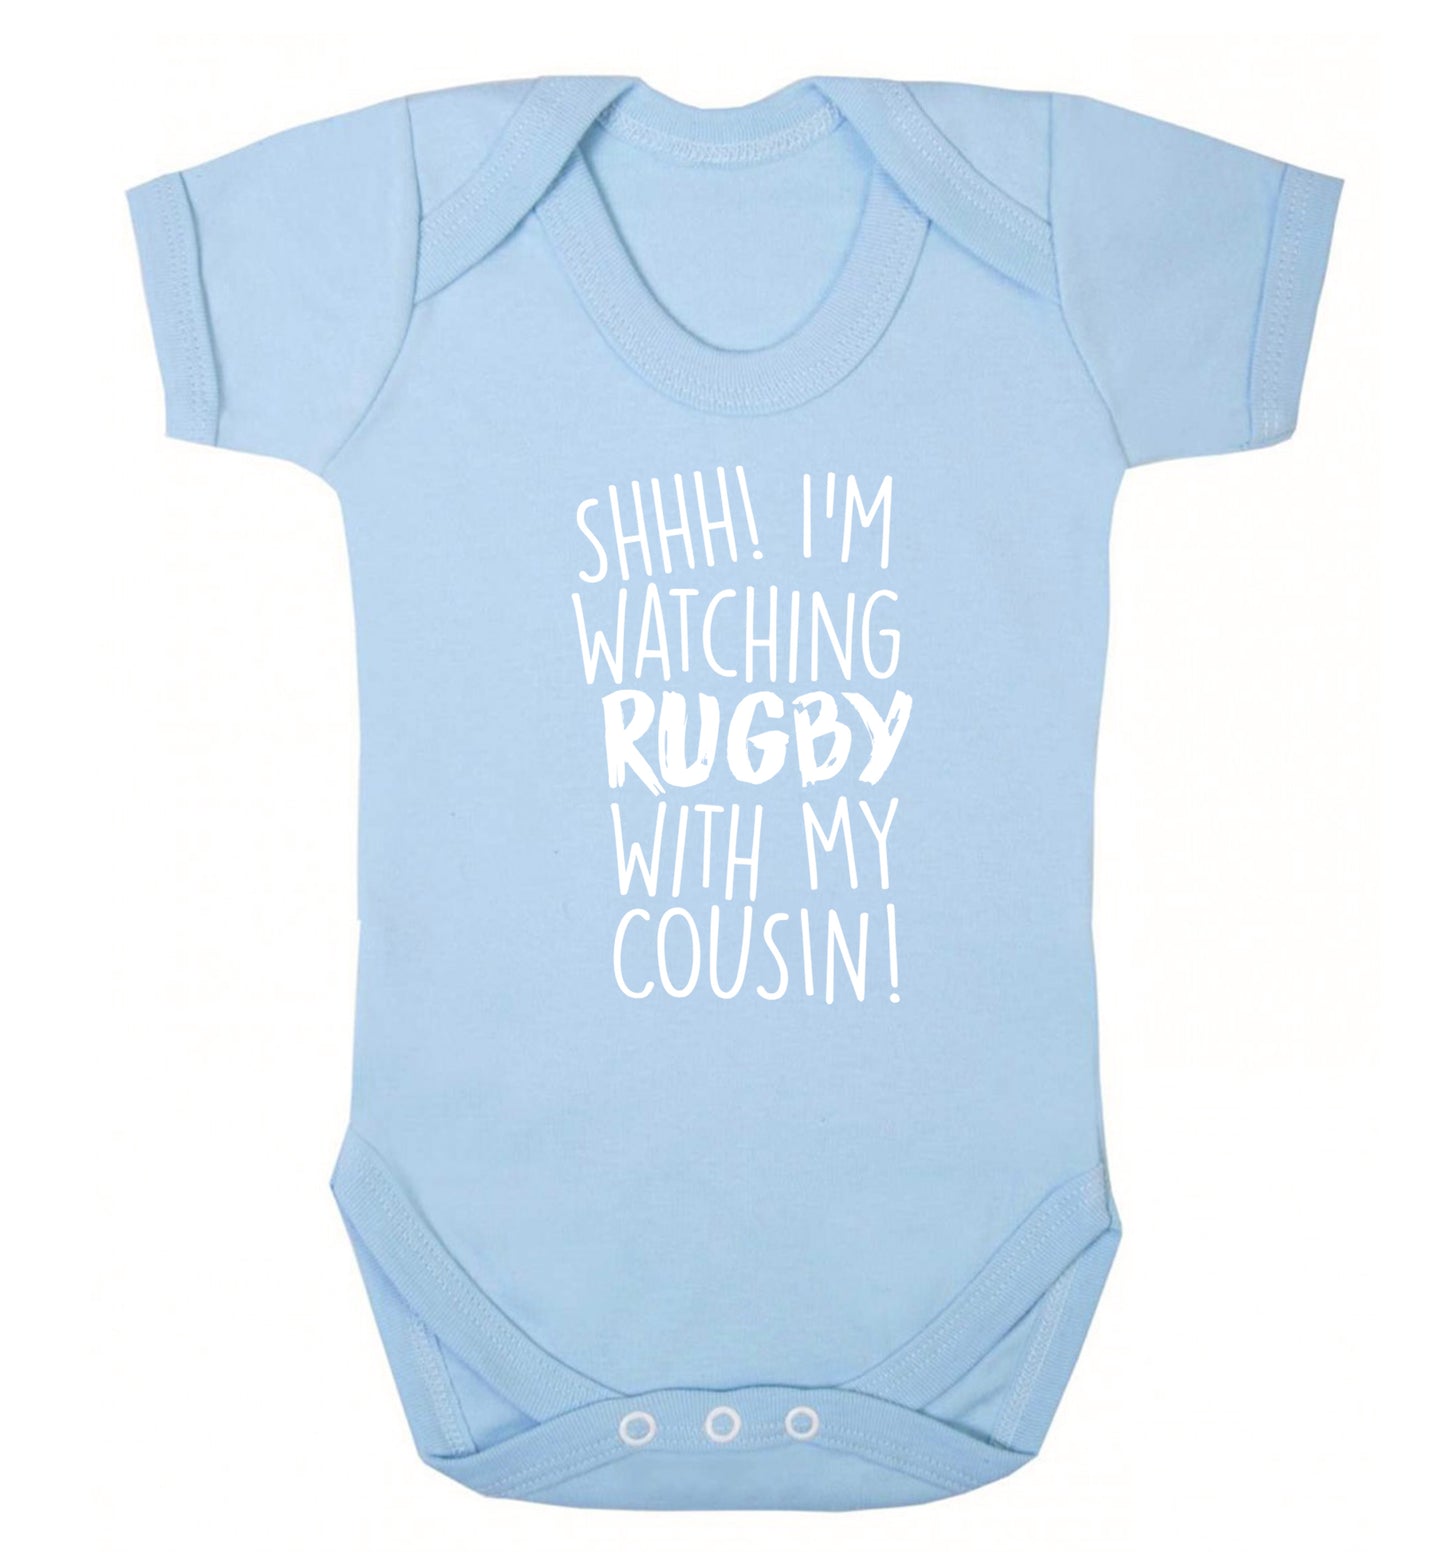 Shhh I'm watching rugby with my cousin Baby Vest pale blue 18-24 months